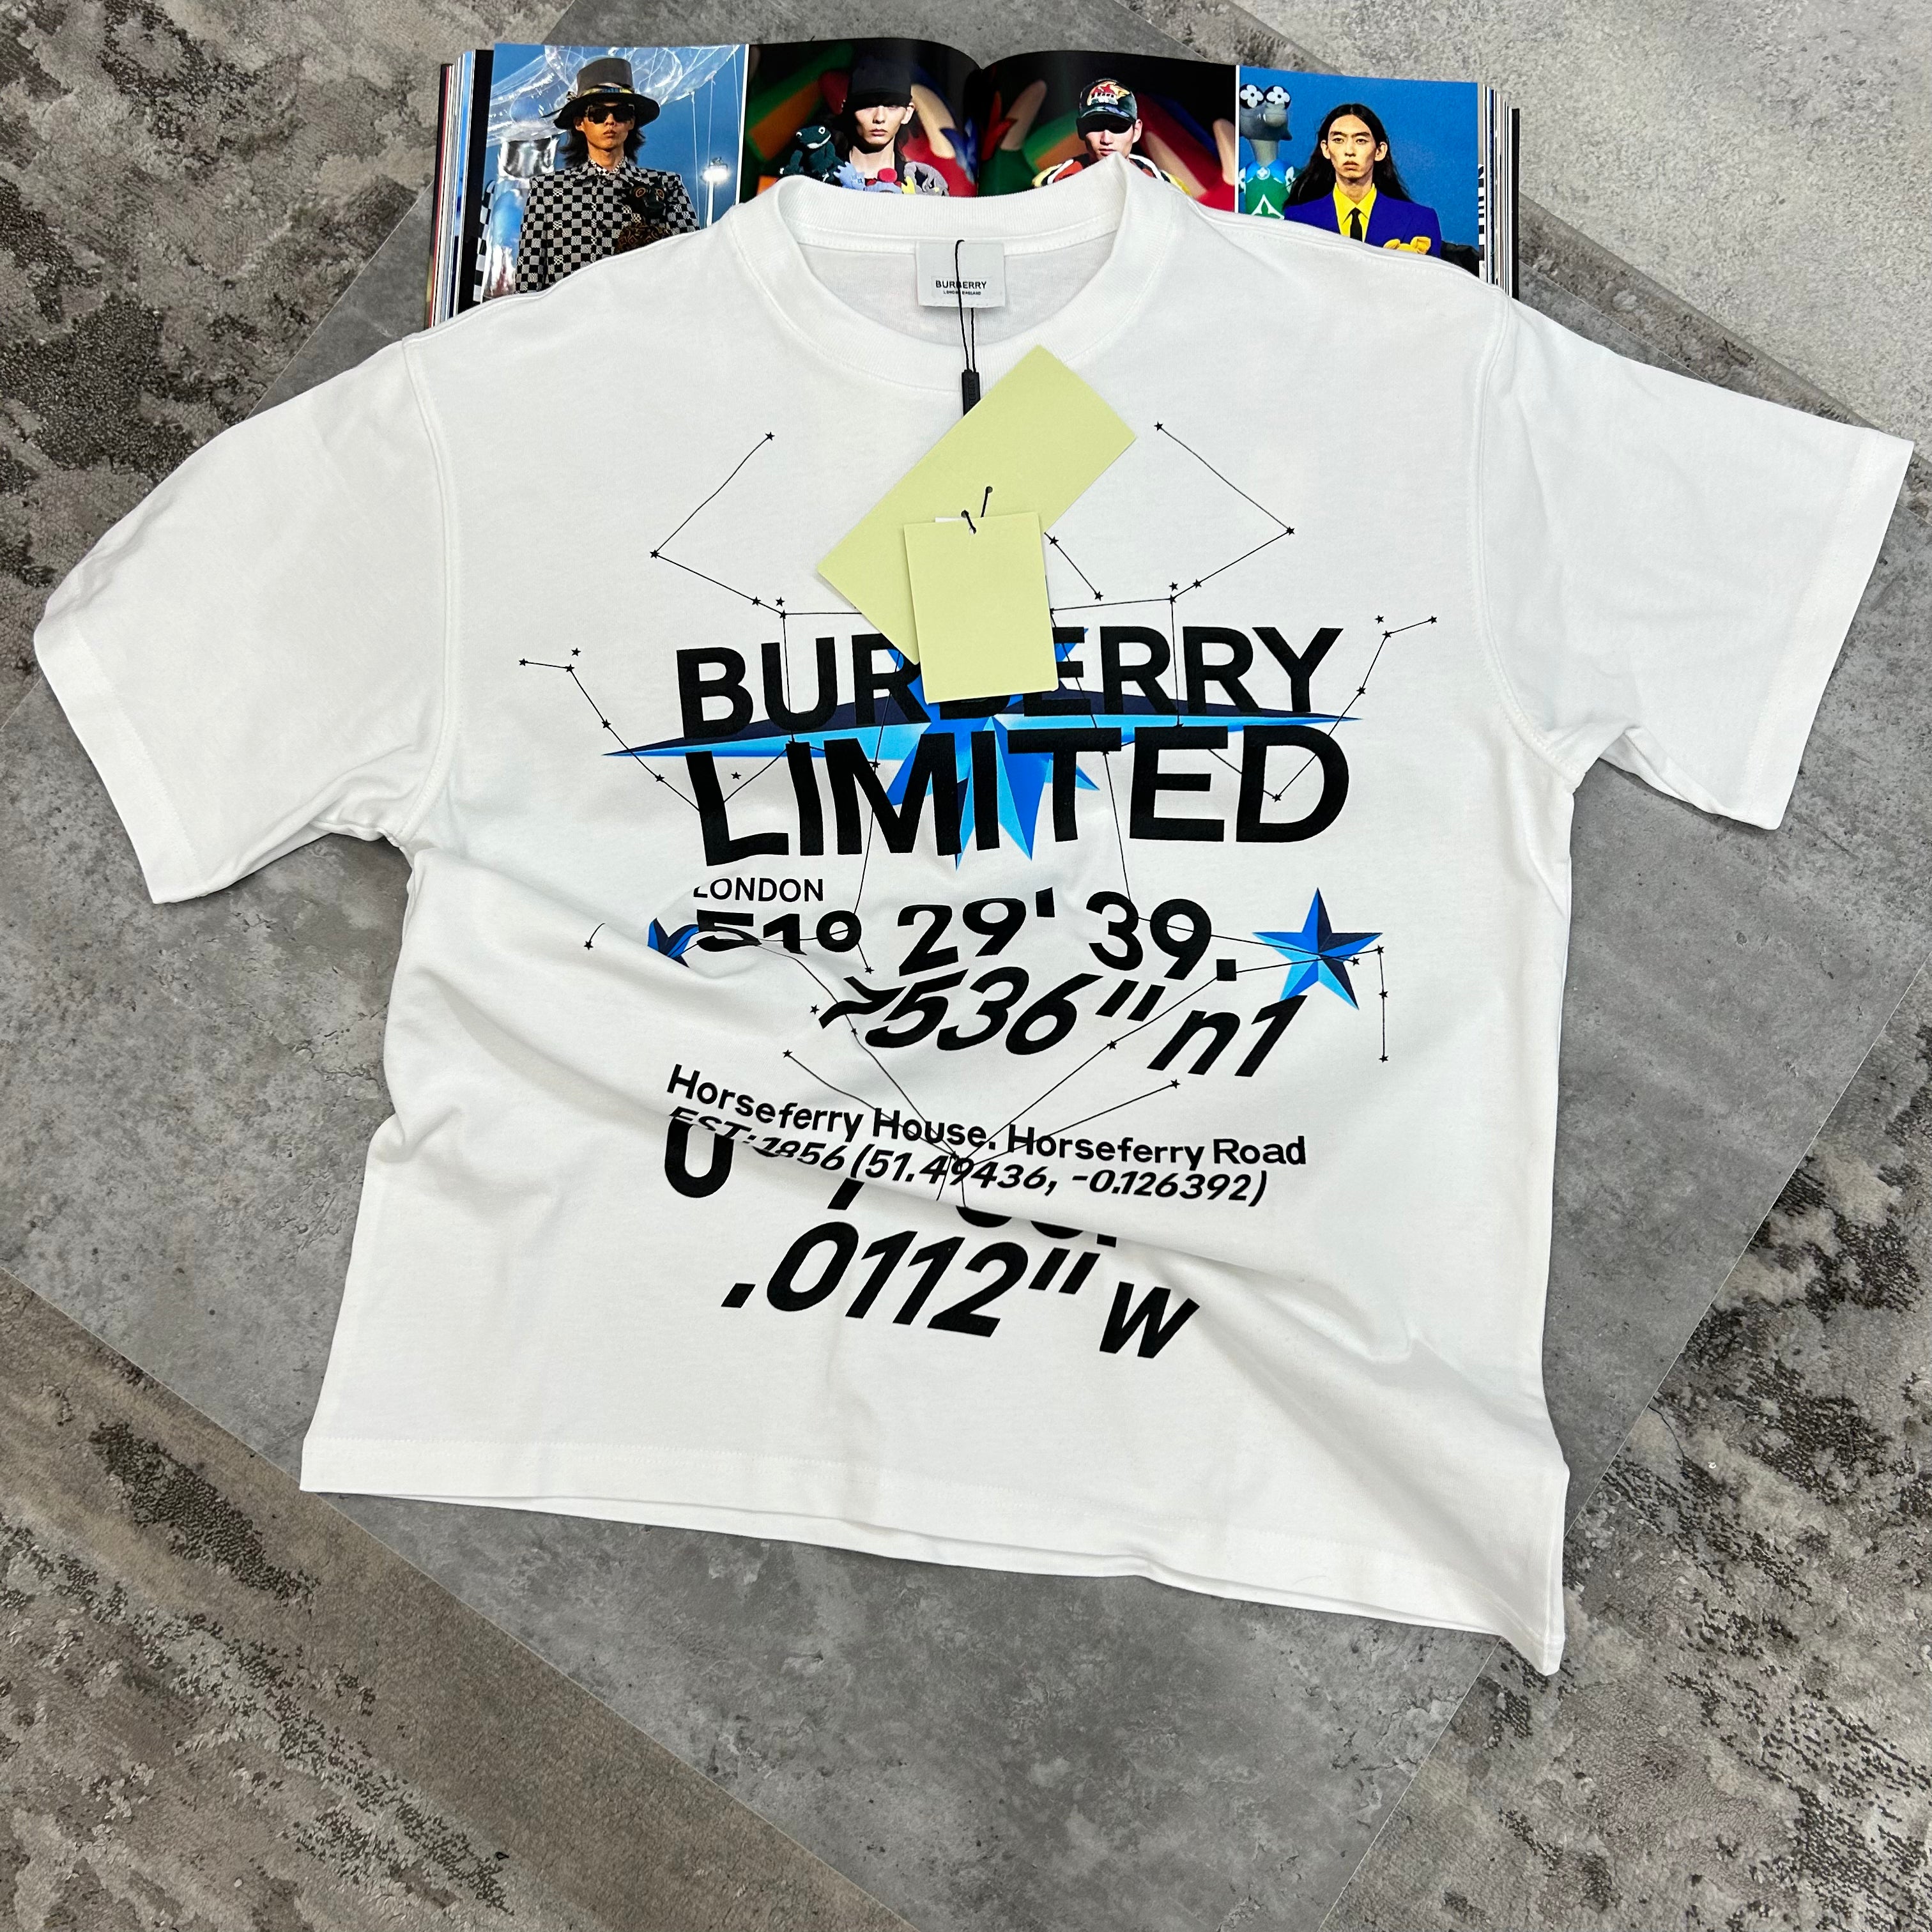 BURBERRY LIMITED T SHIRT